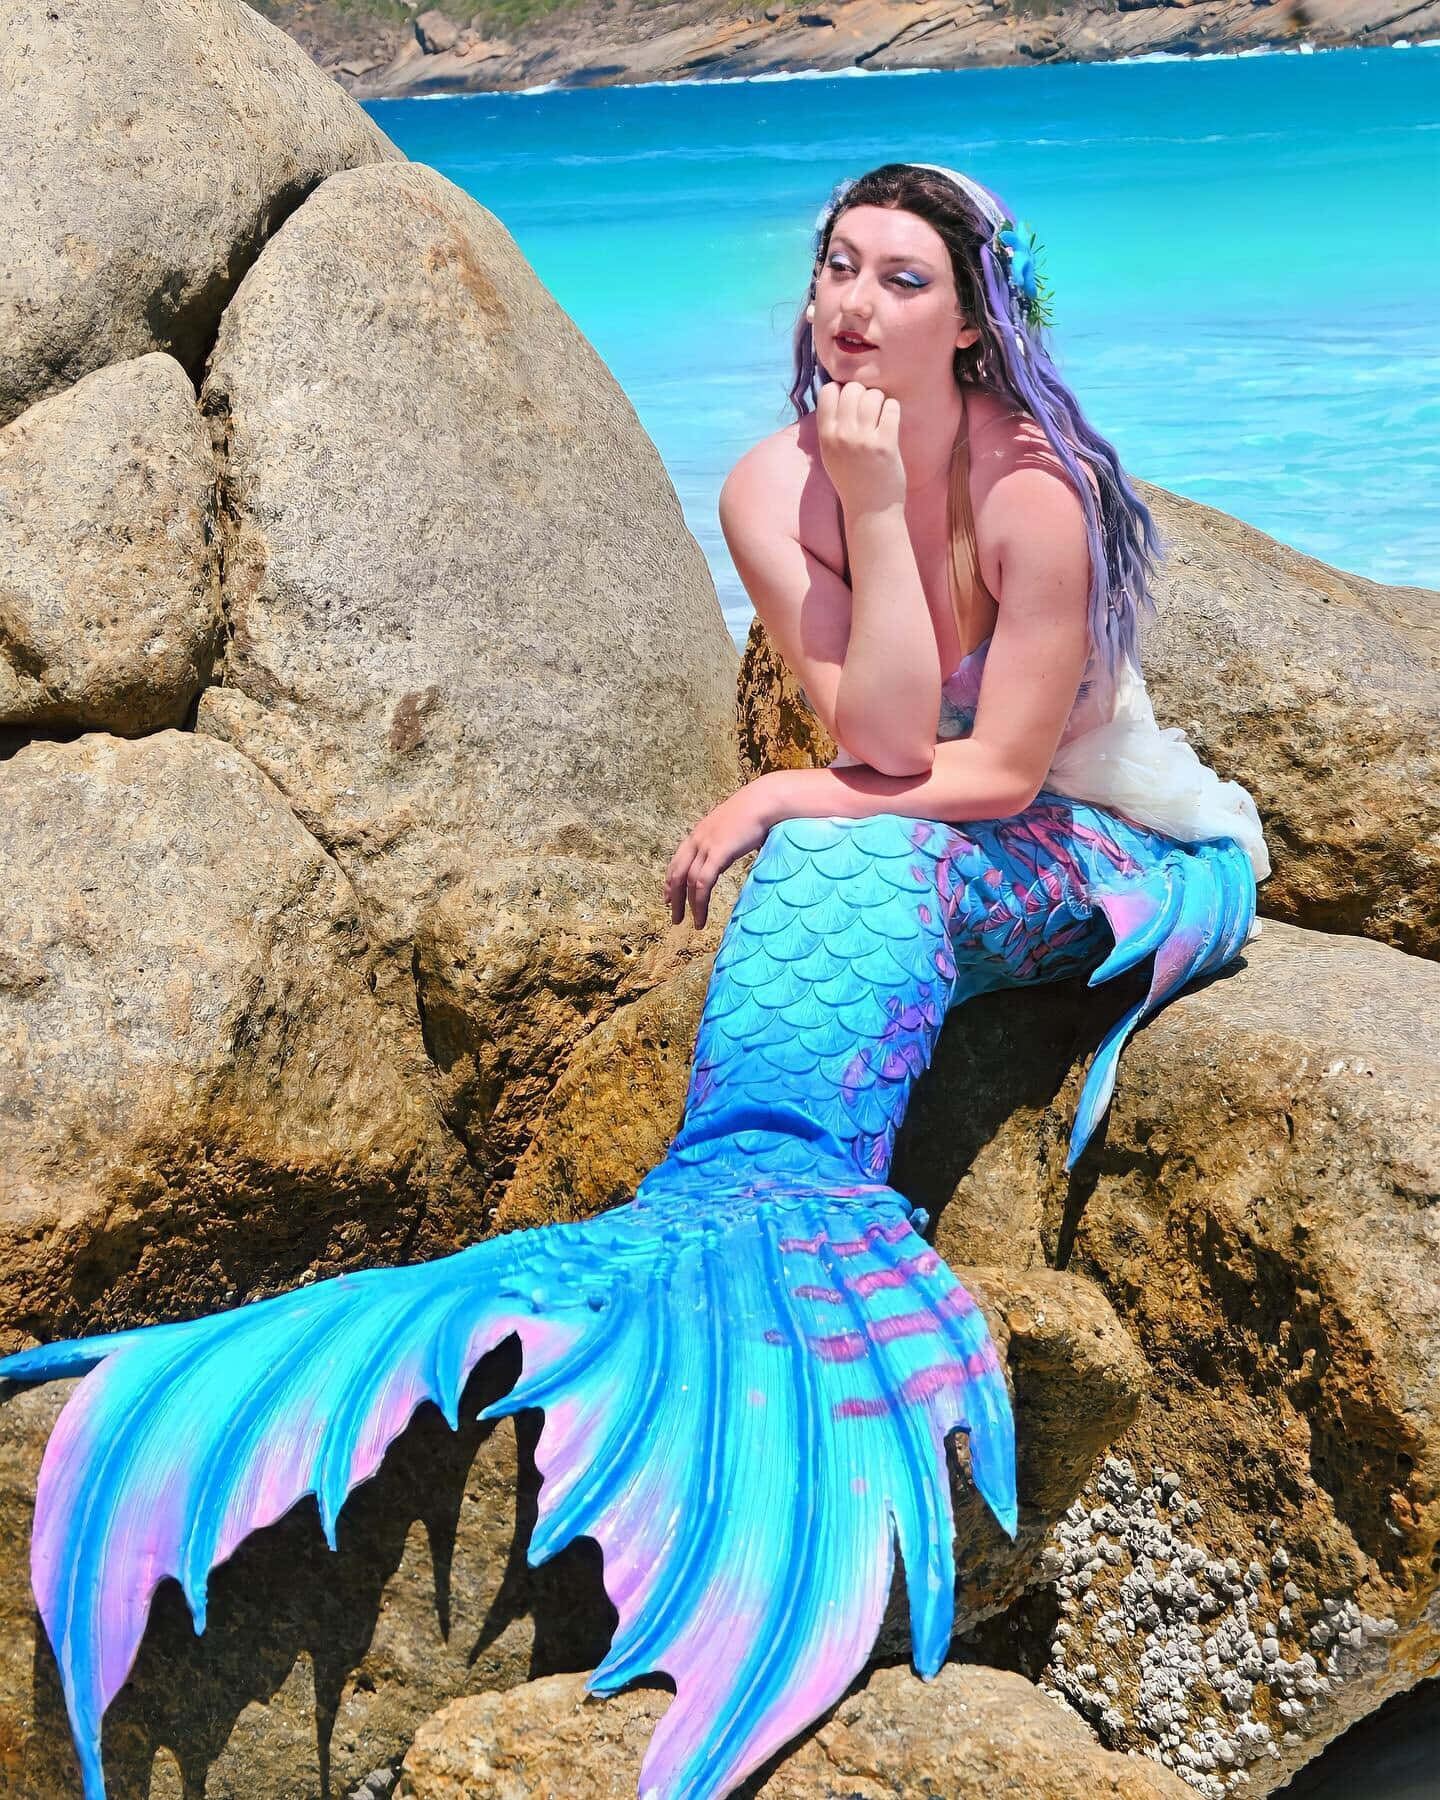 A real-life mermaid's sparkling tail glimmering in the sun.